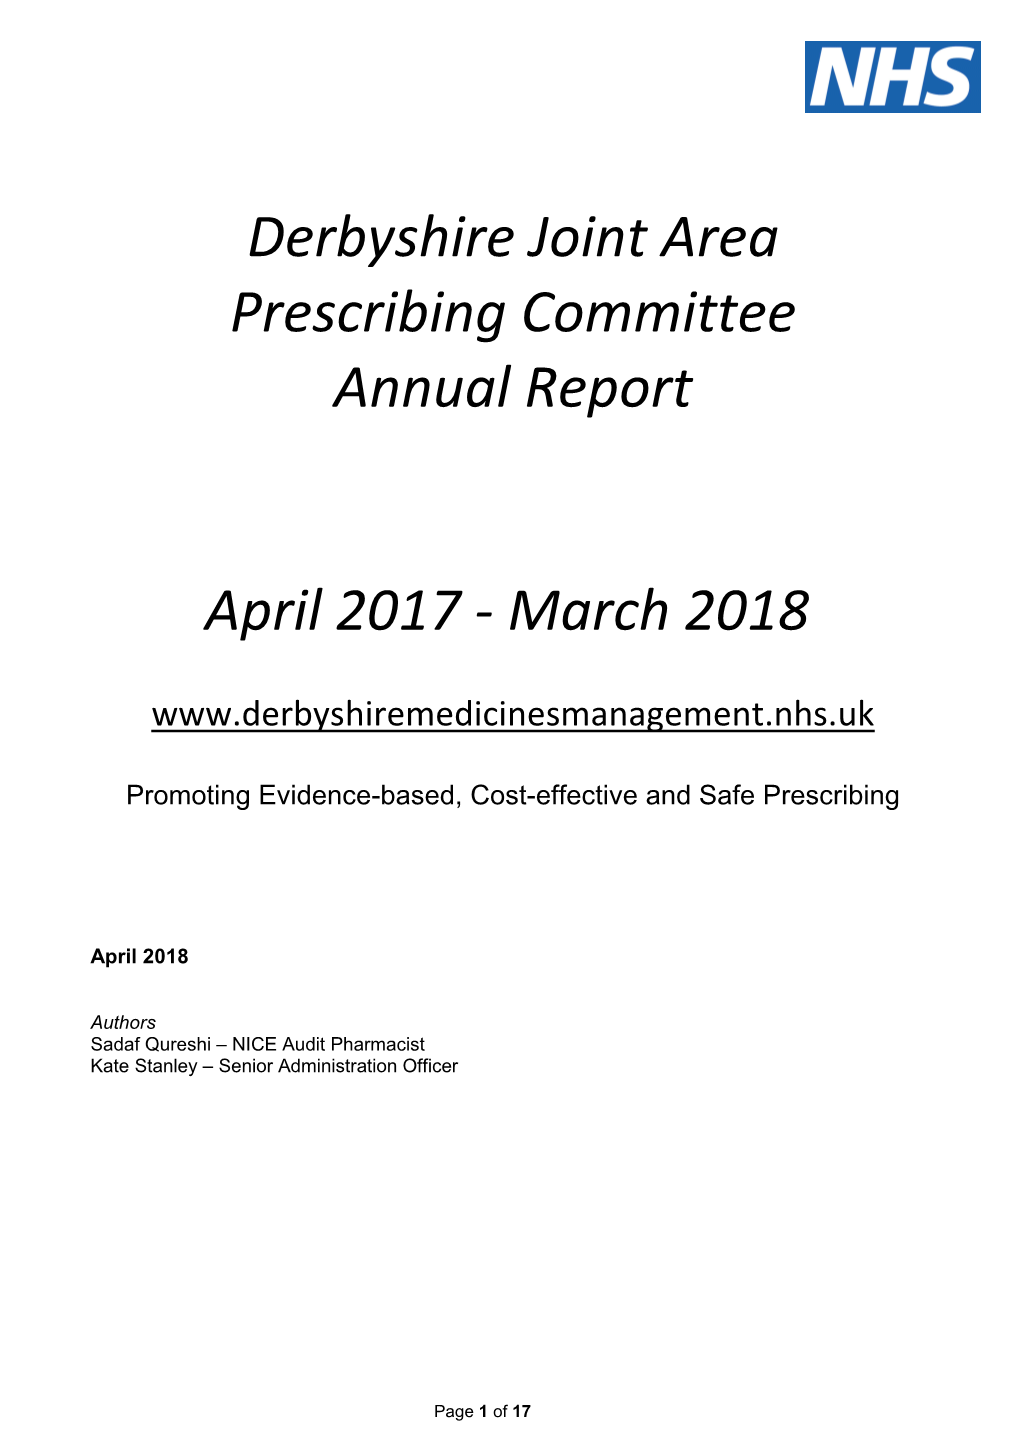 Derbyshire Joint Area Prescribing Committee Annual Report April 2017